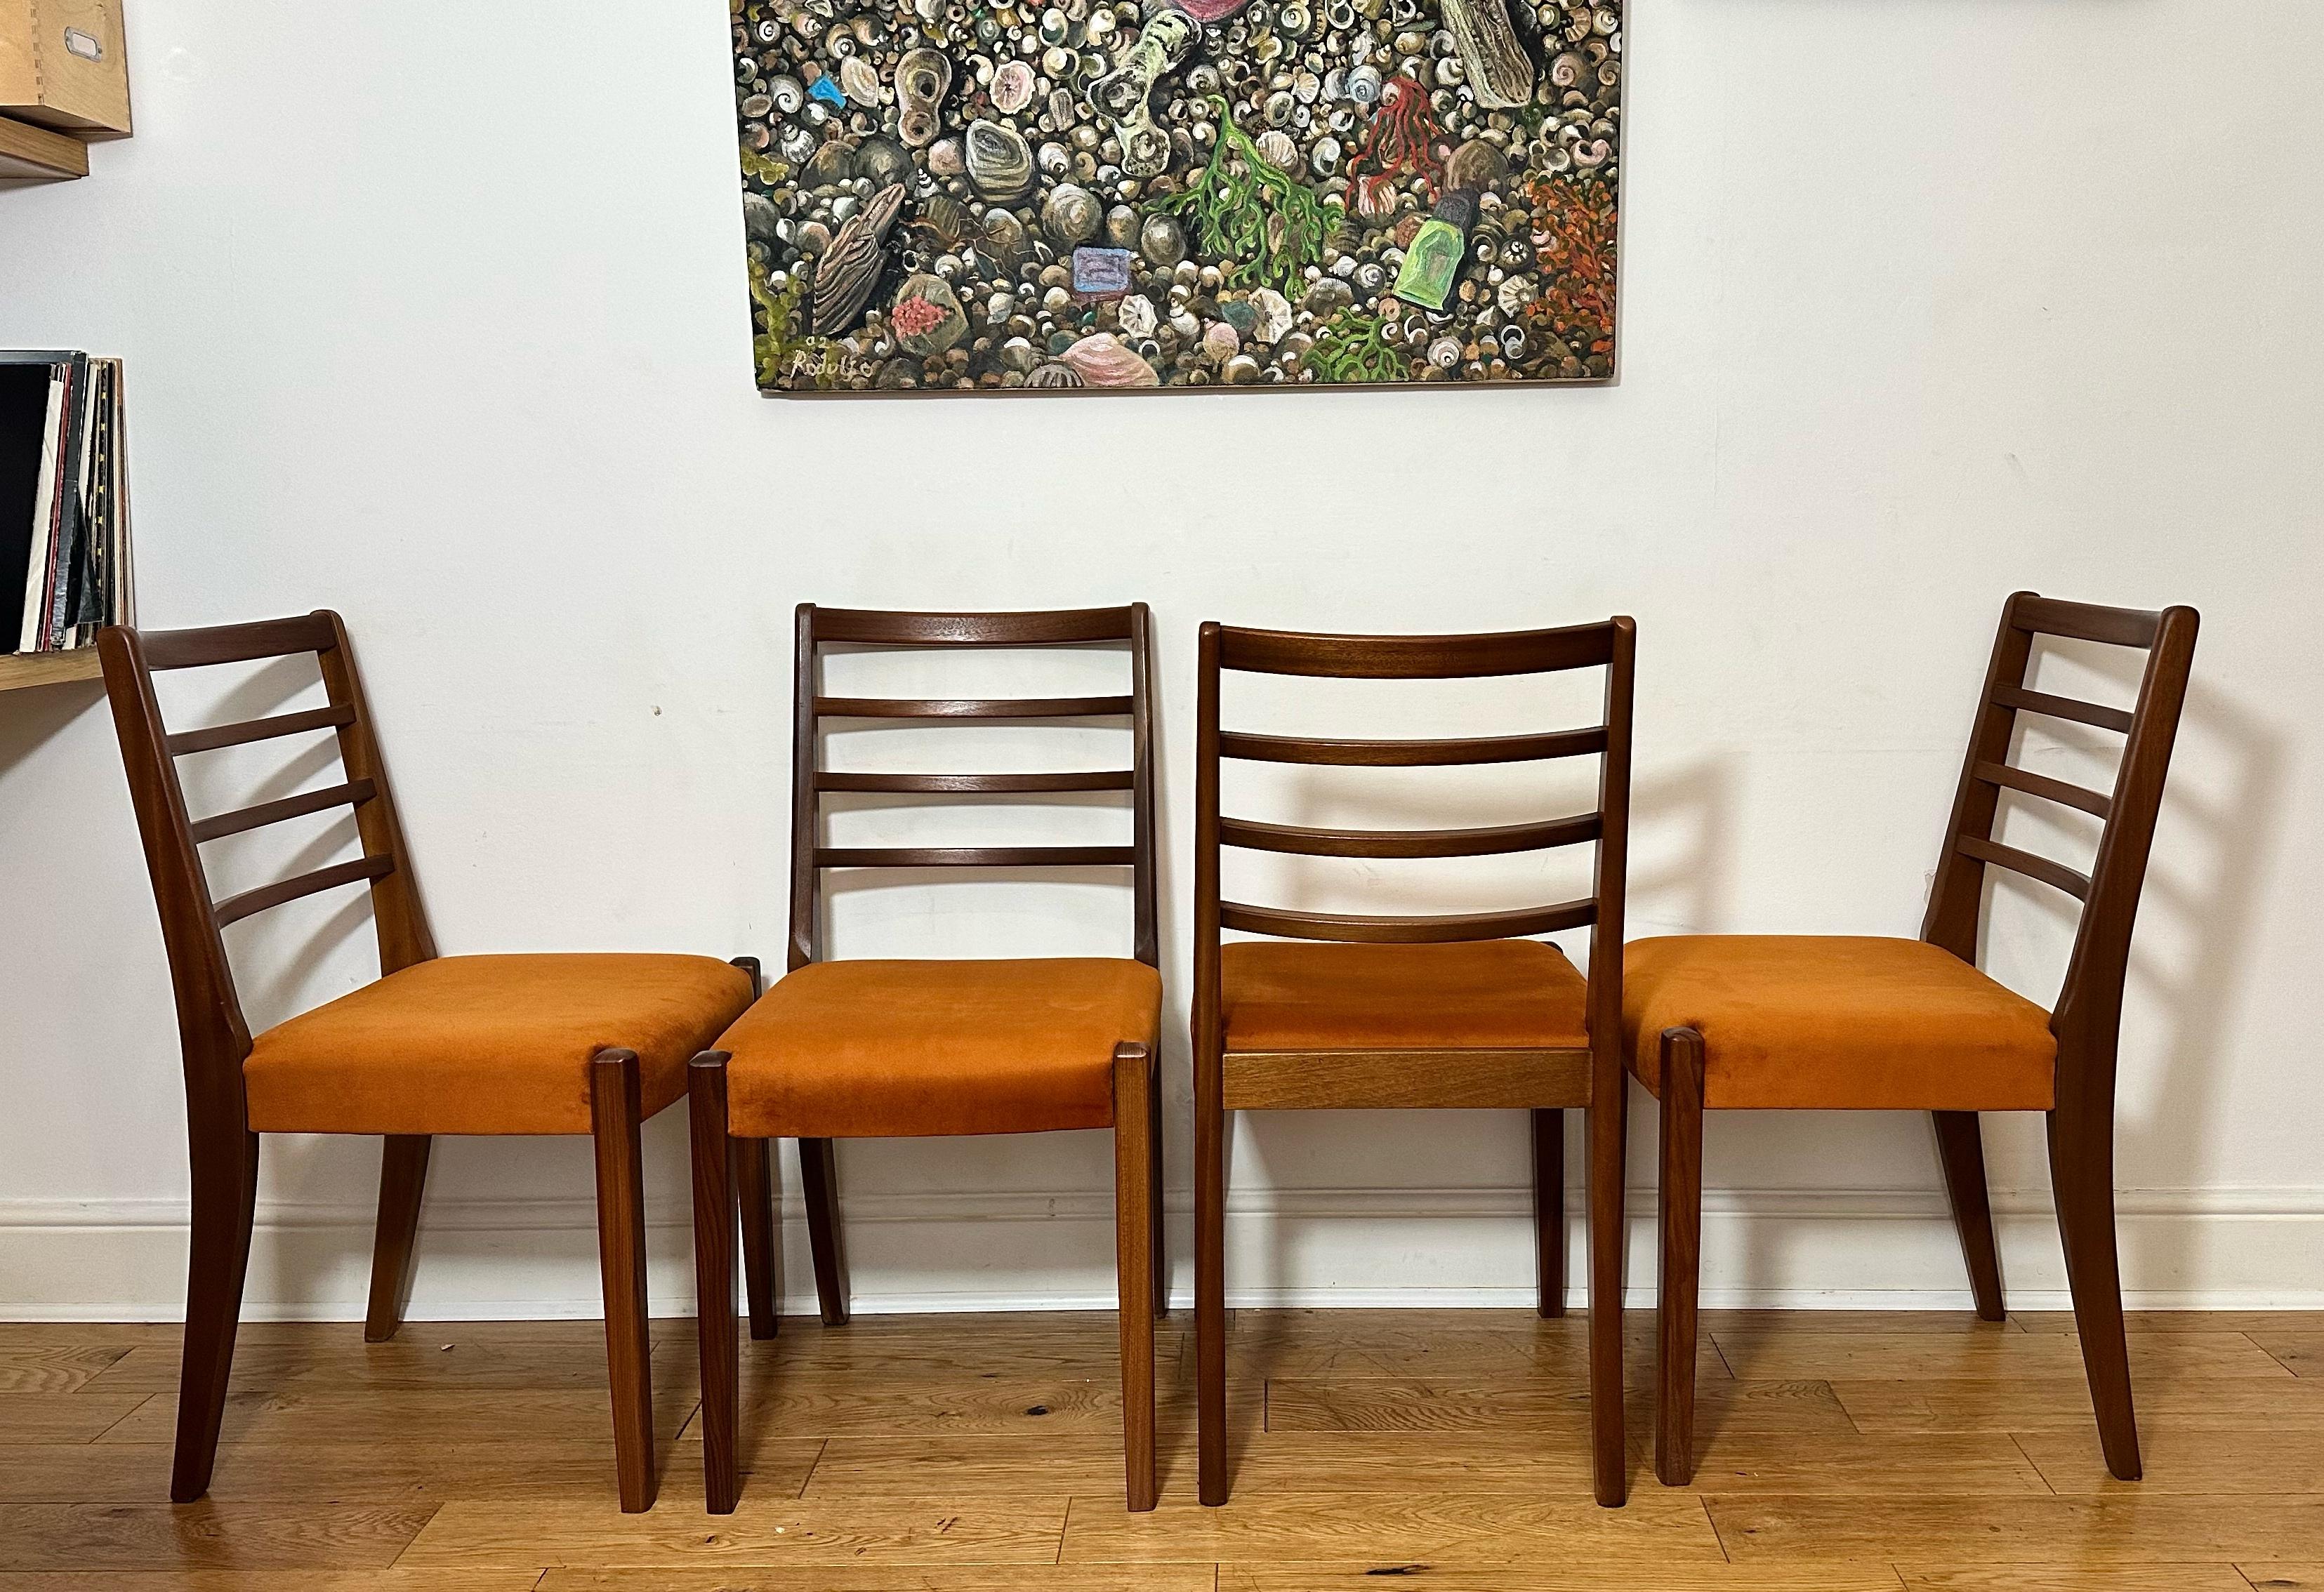 Beautiful, top quality mid-century set of six ladder back Danish chairs. Very stylish Scandinavian design with rich golden teak grain and super comfortable seats. Frames have been cleaned and wax polished. Immaculate, near new condition, these